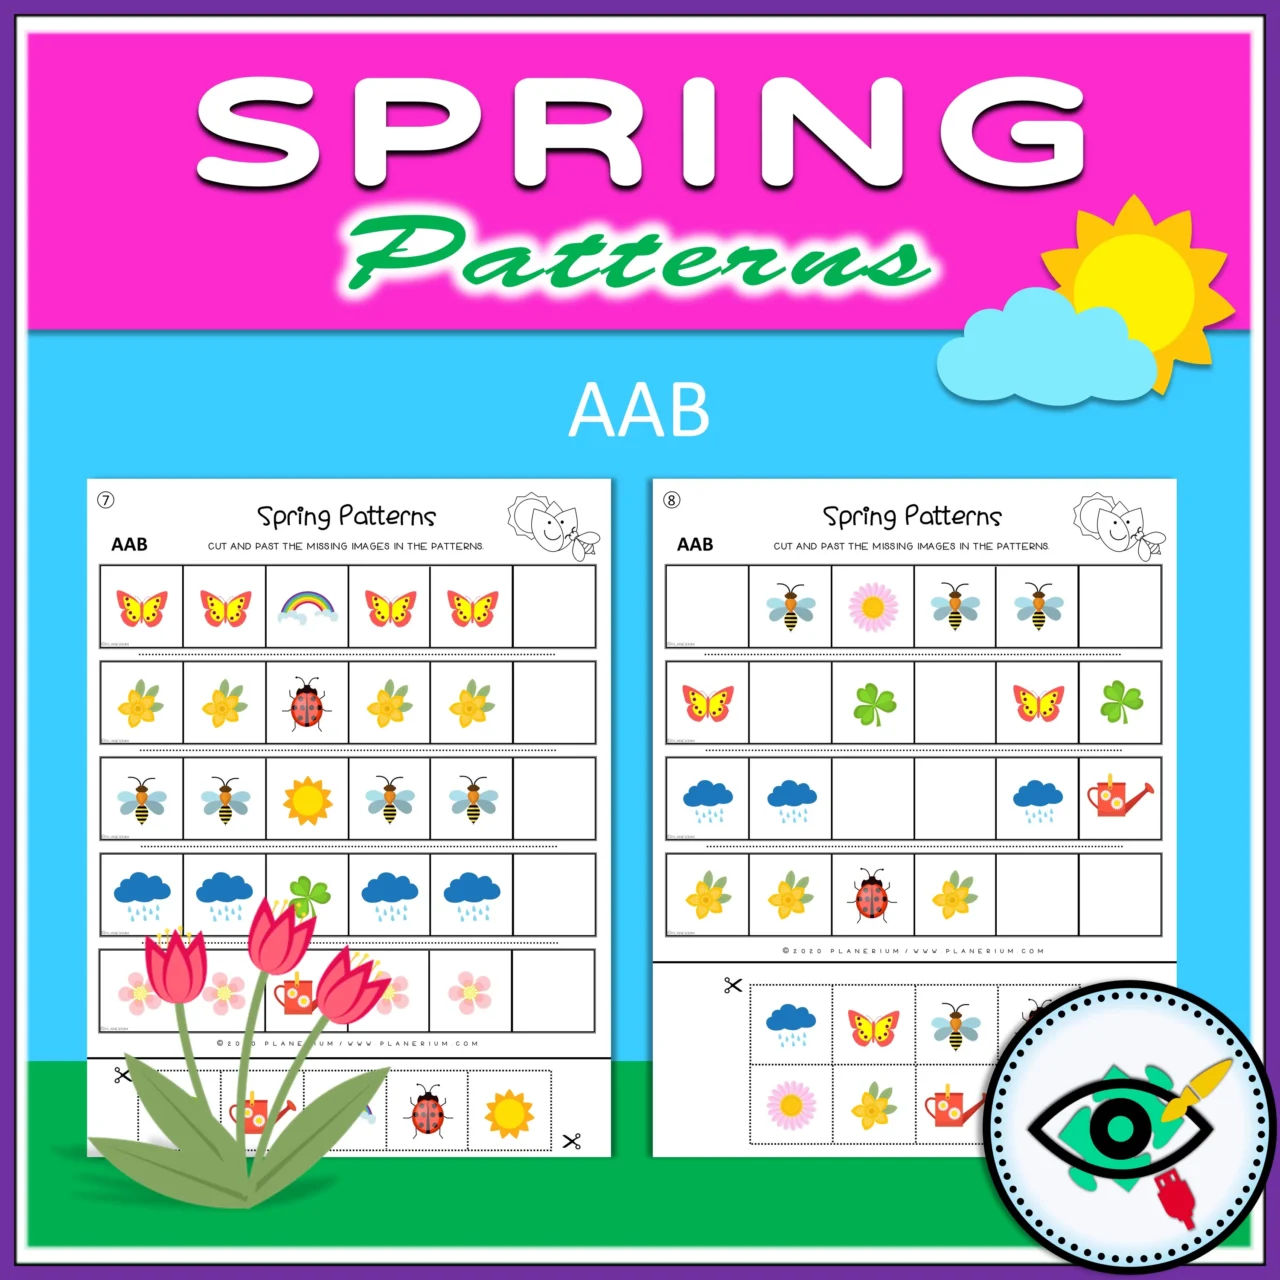 Spring - Patterns Activity - Image Title 5